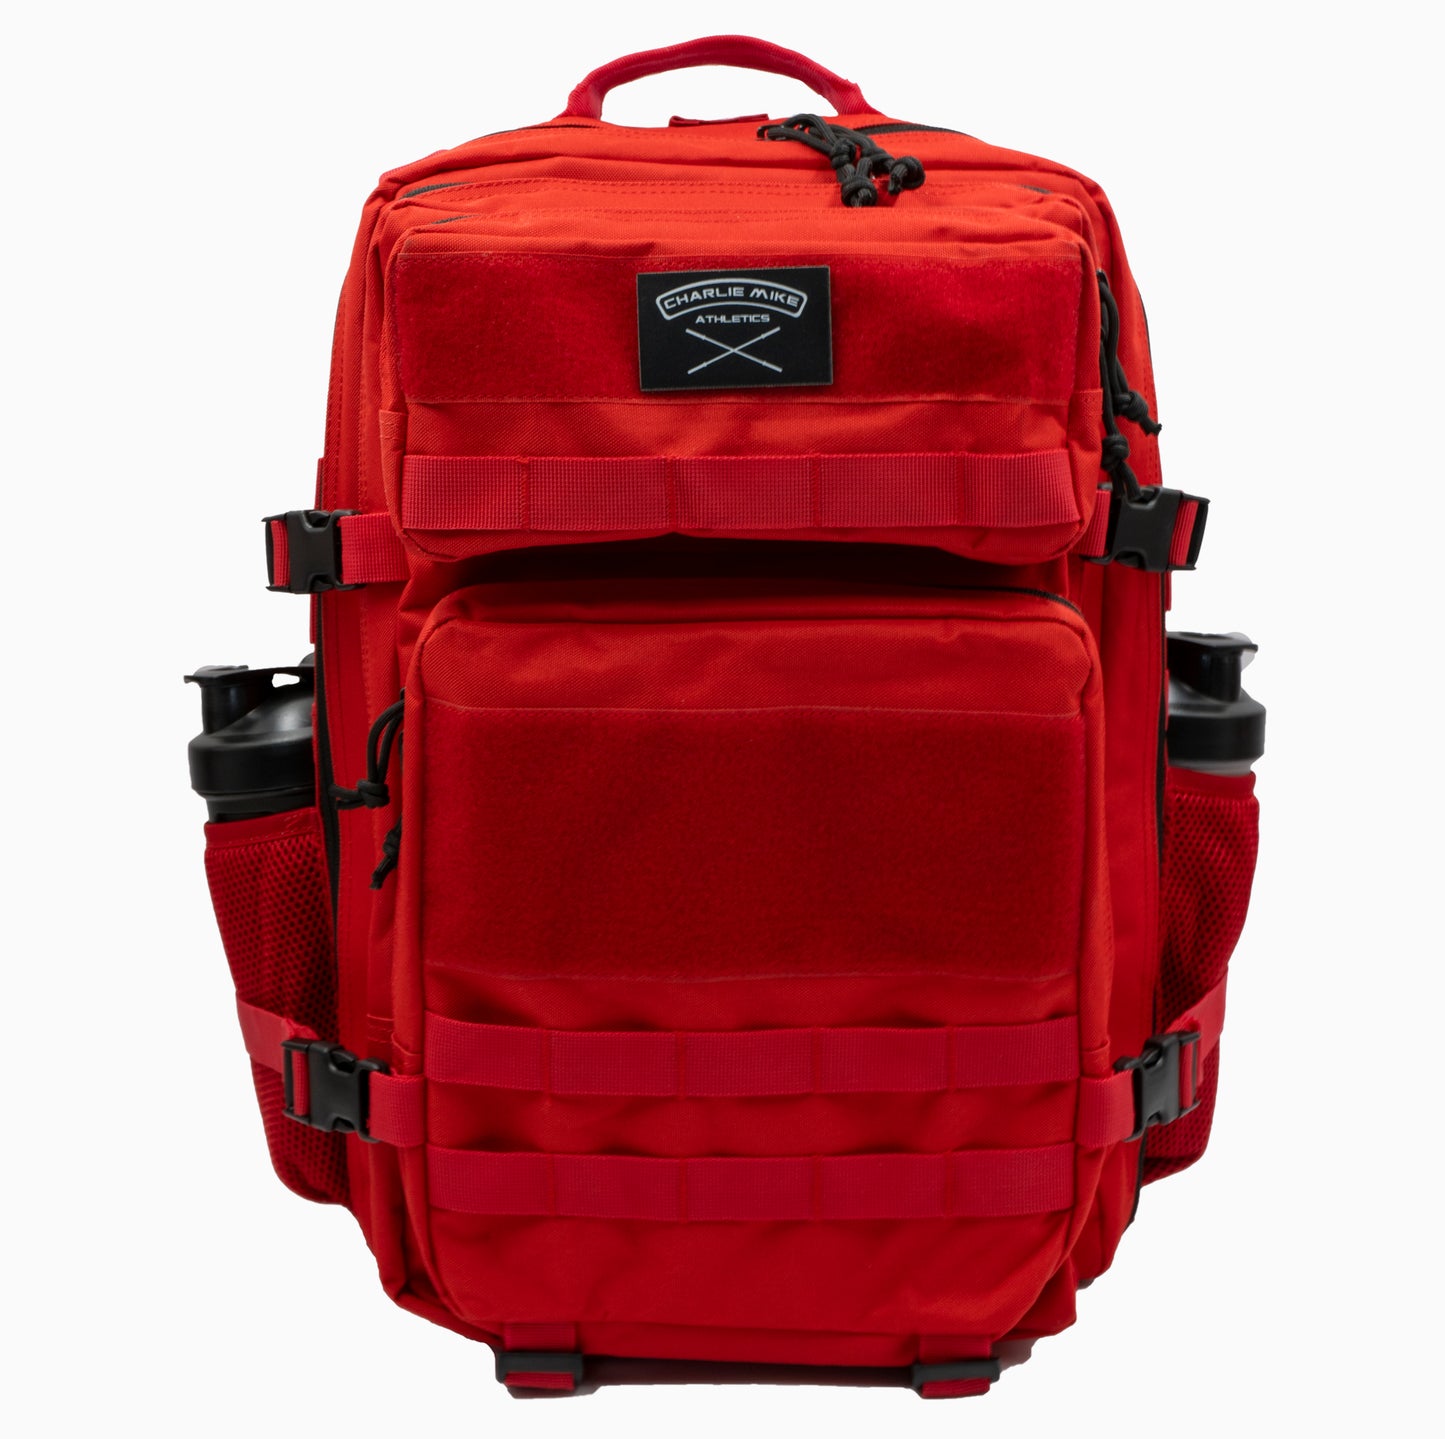 REDCON-1 Pack 45L - Relentless Red